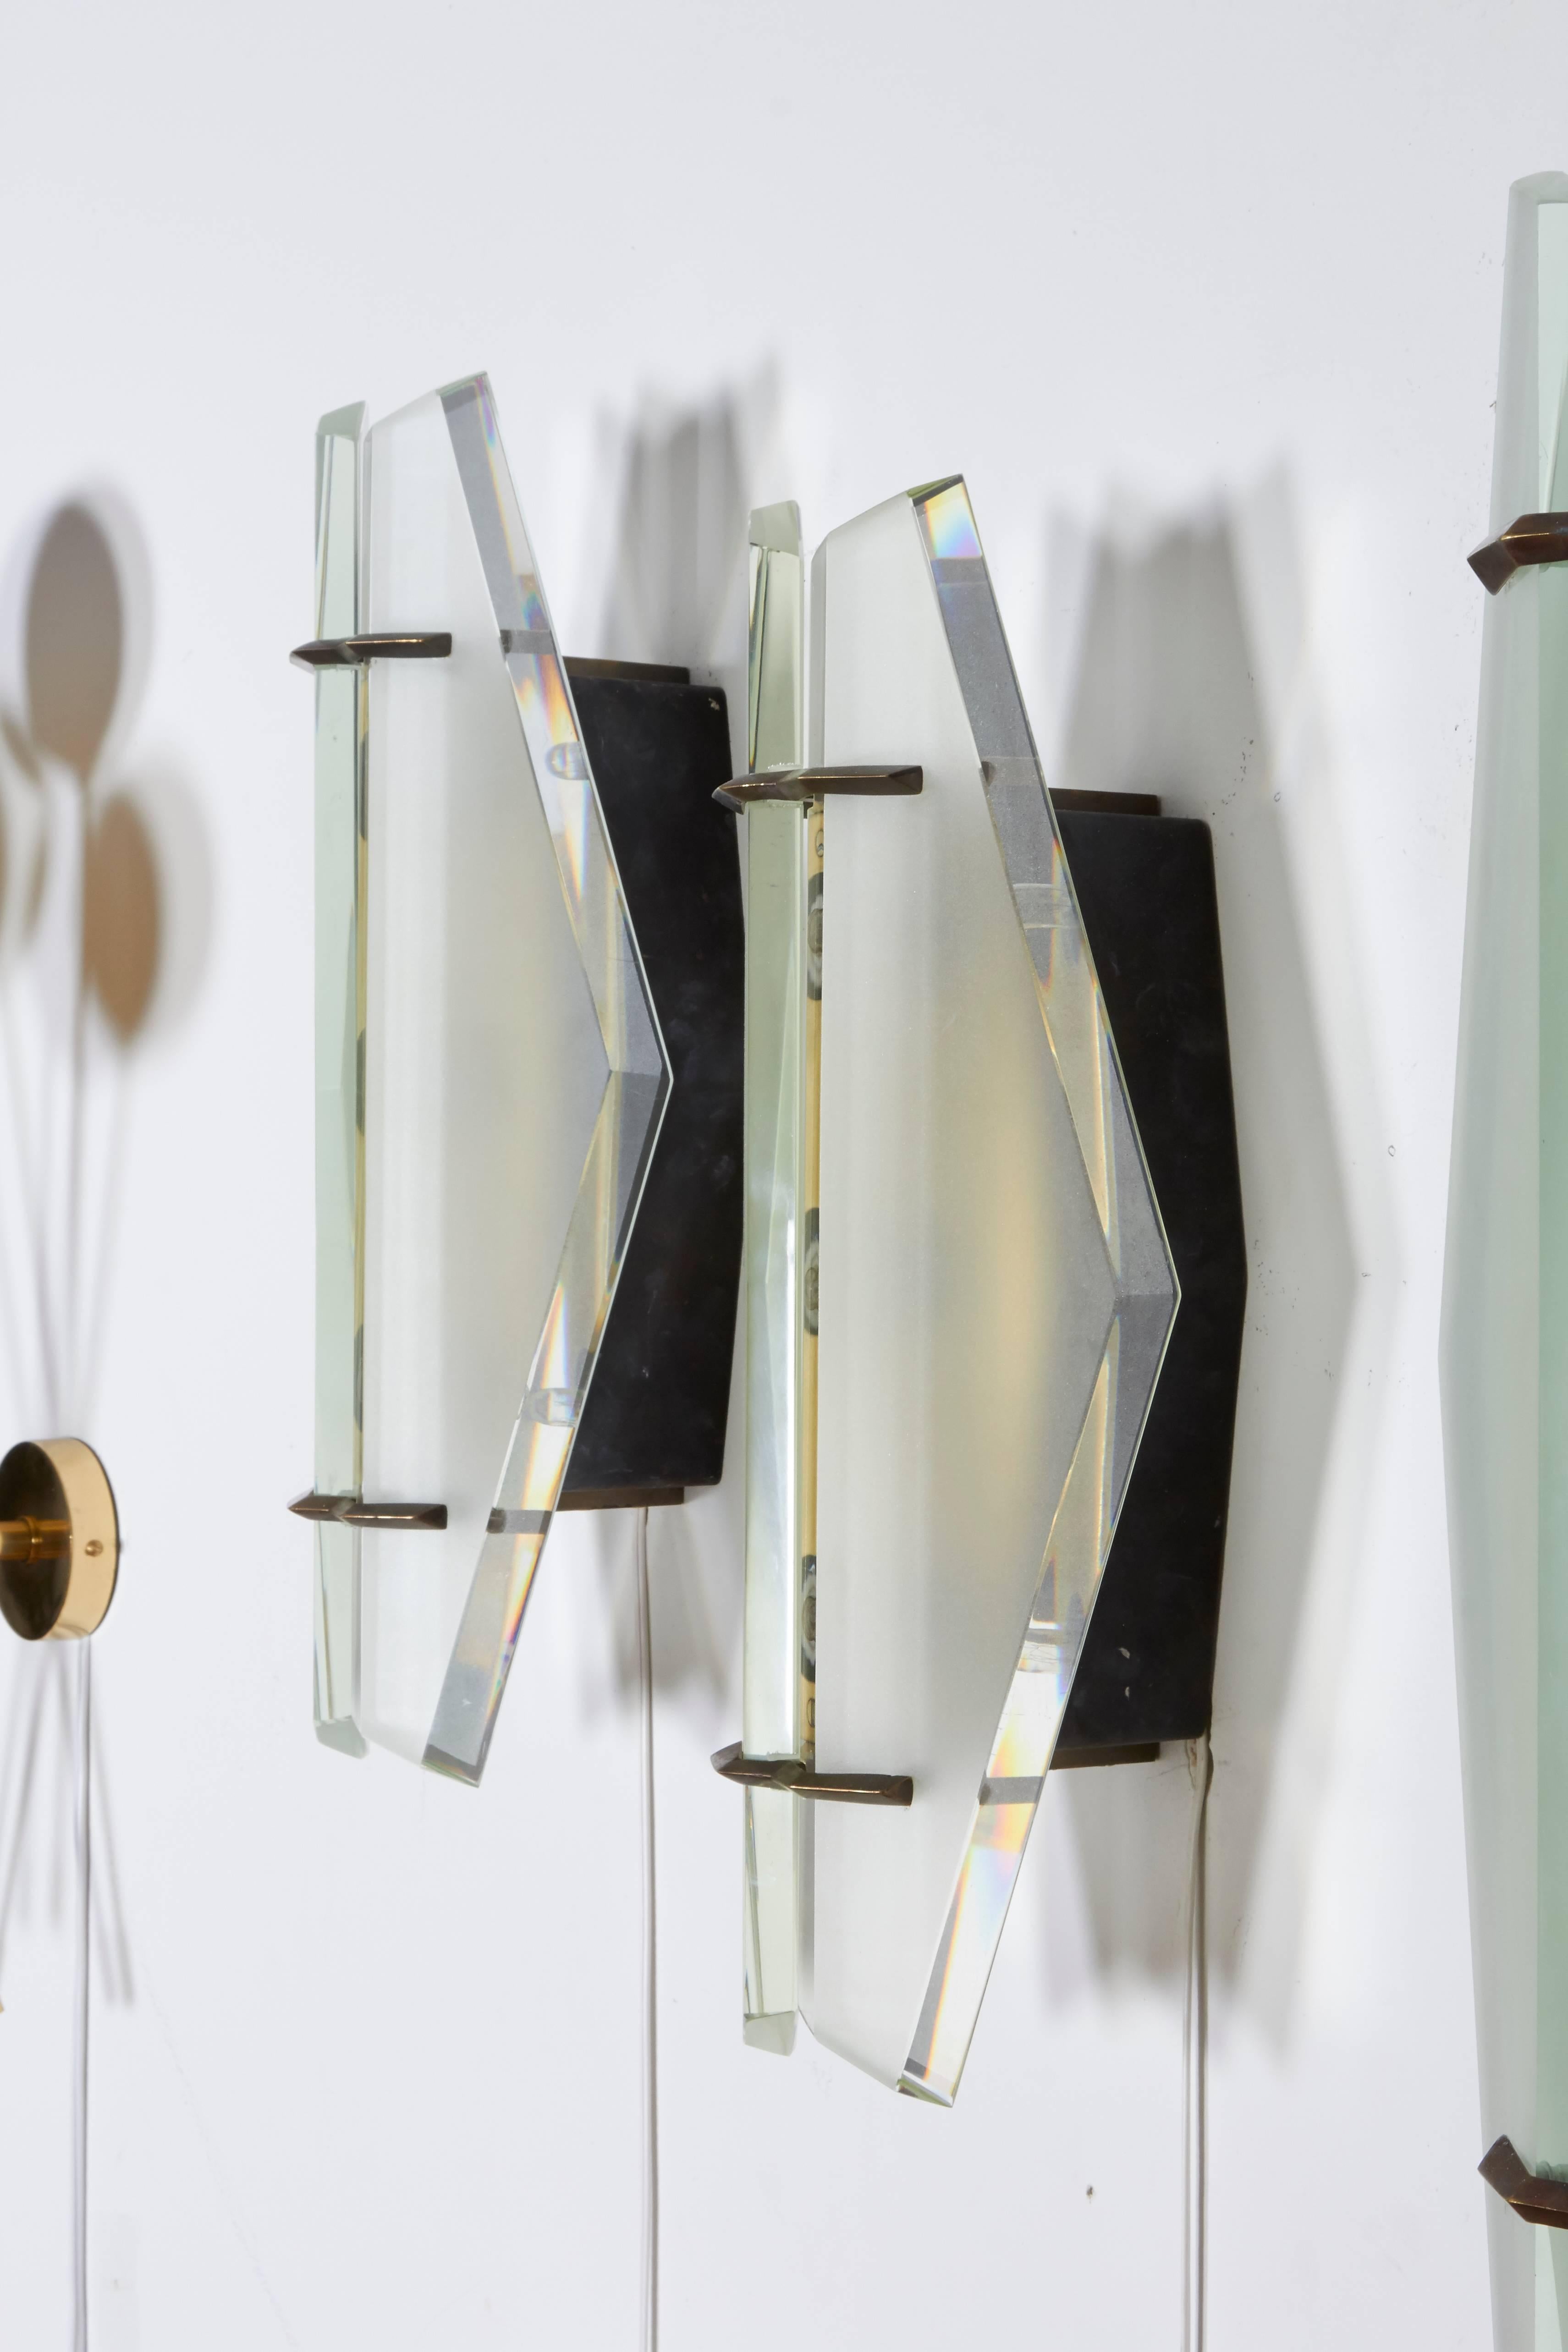 Pair of Italian Mid-Century Sconces Attributed to Max Ingrand for Fontana Arte (Moderne der Mitte des Jahrhunderts)